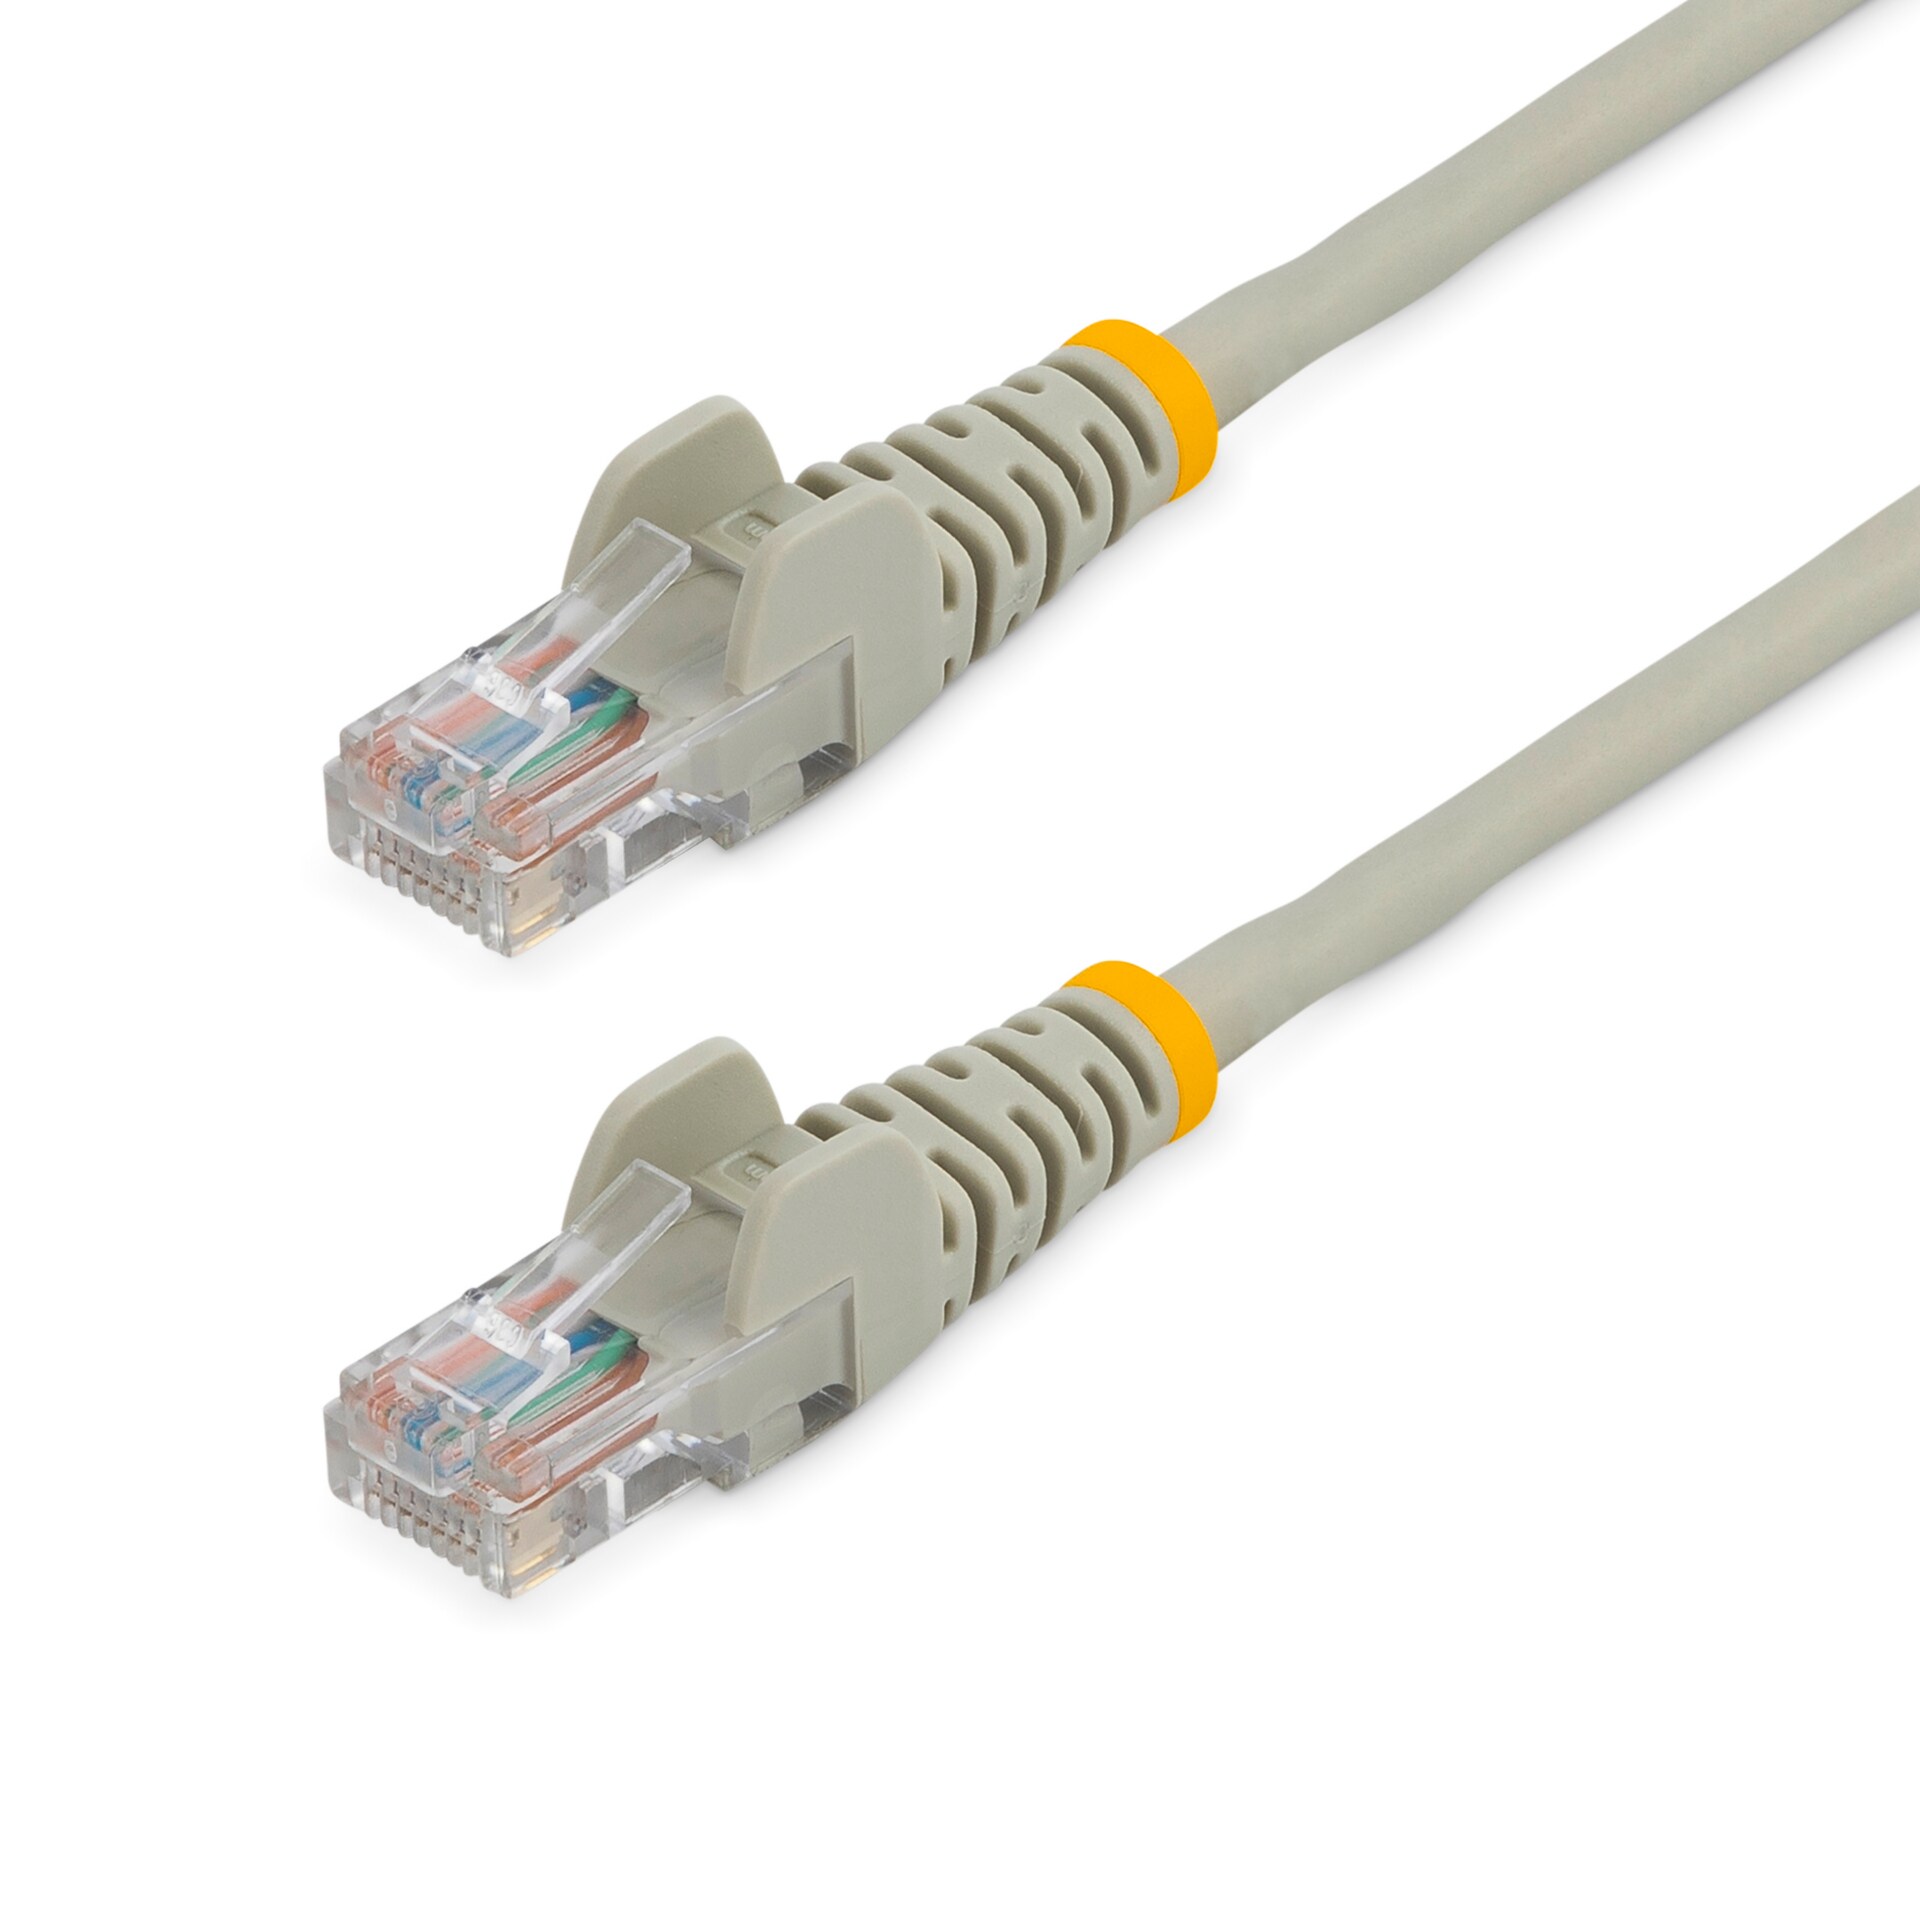 StarTech.com Cat5e Ethernet Cable 15 ft Gray - Cat 5e Snagless Patch Cable